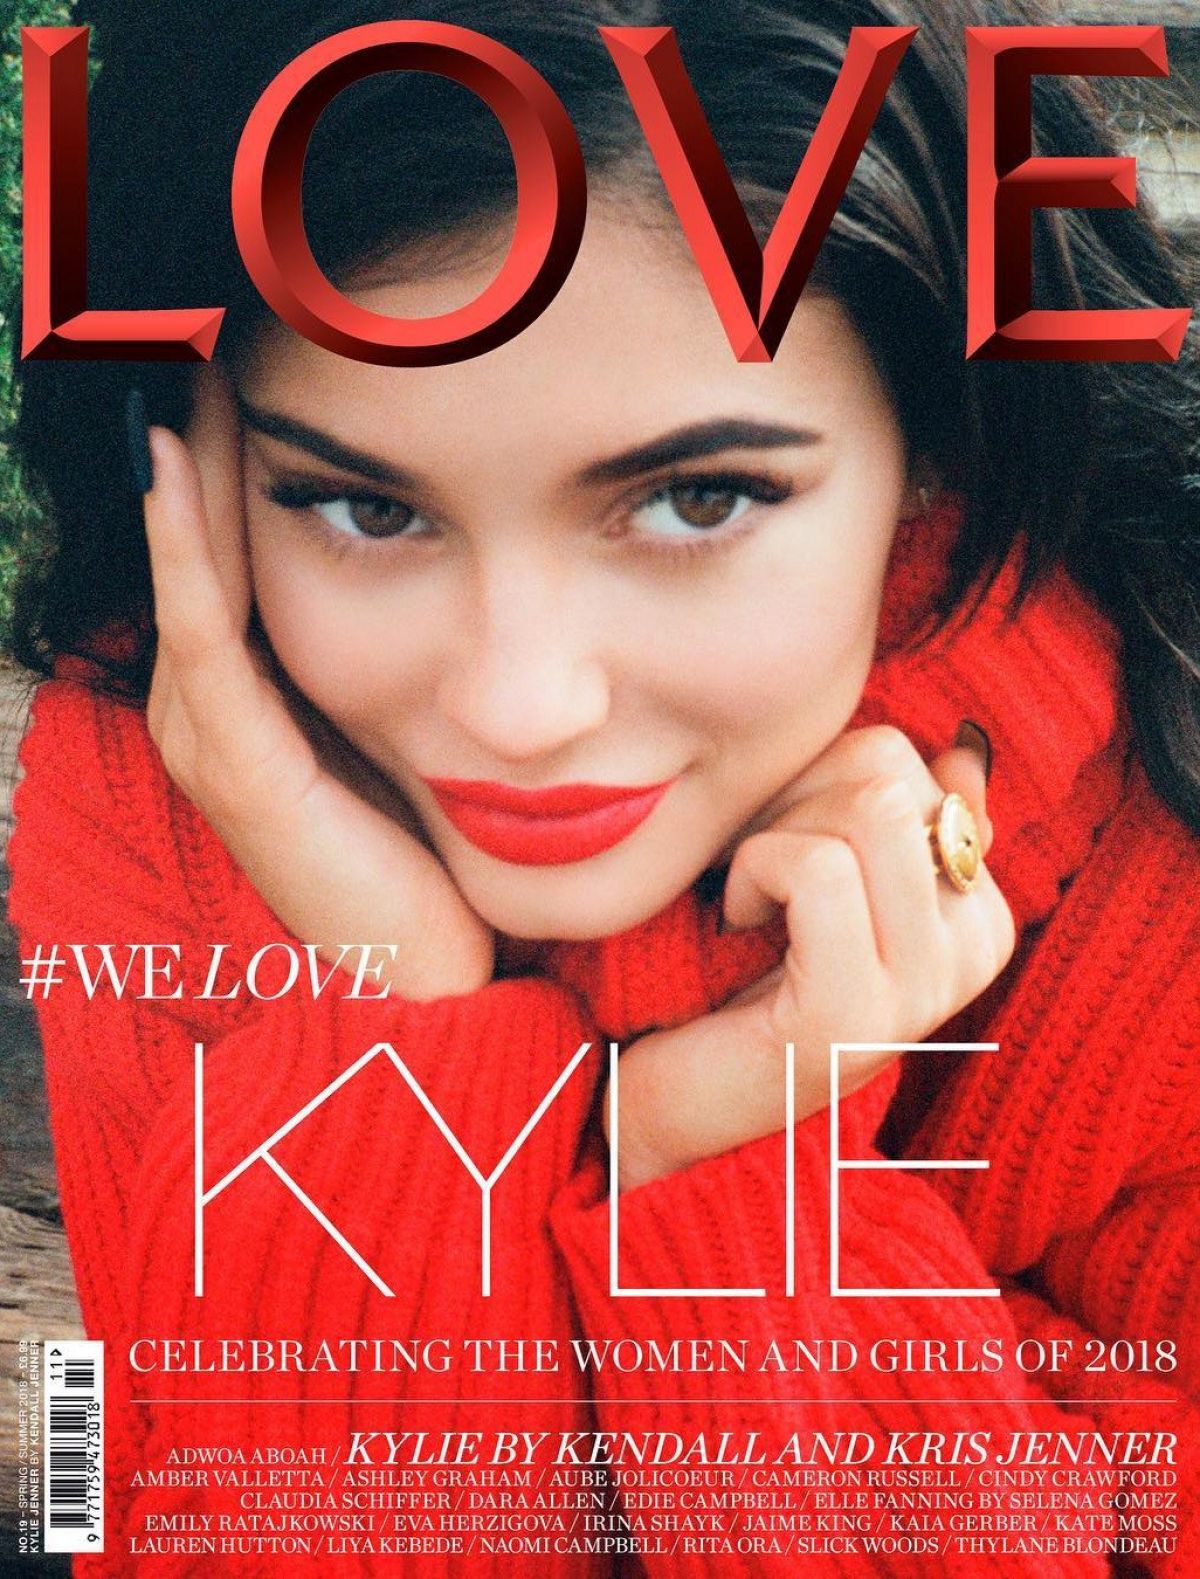 KYLIE JENNER on the Cover of Love Magazine, No.19 Spring/Summer 2018